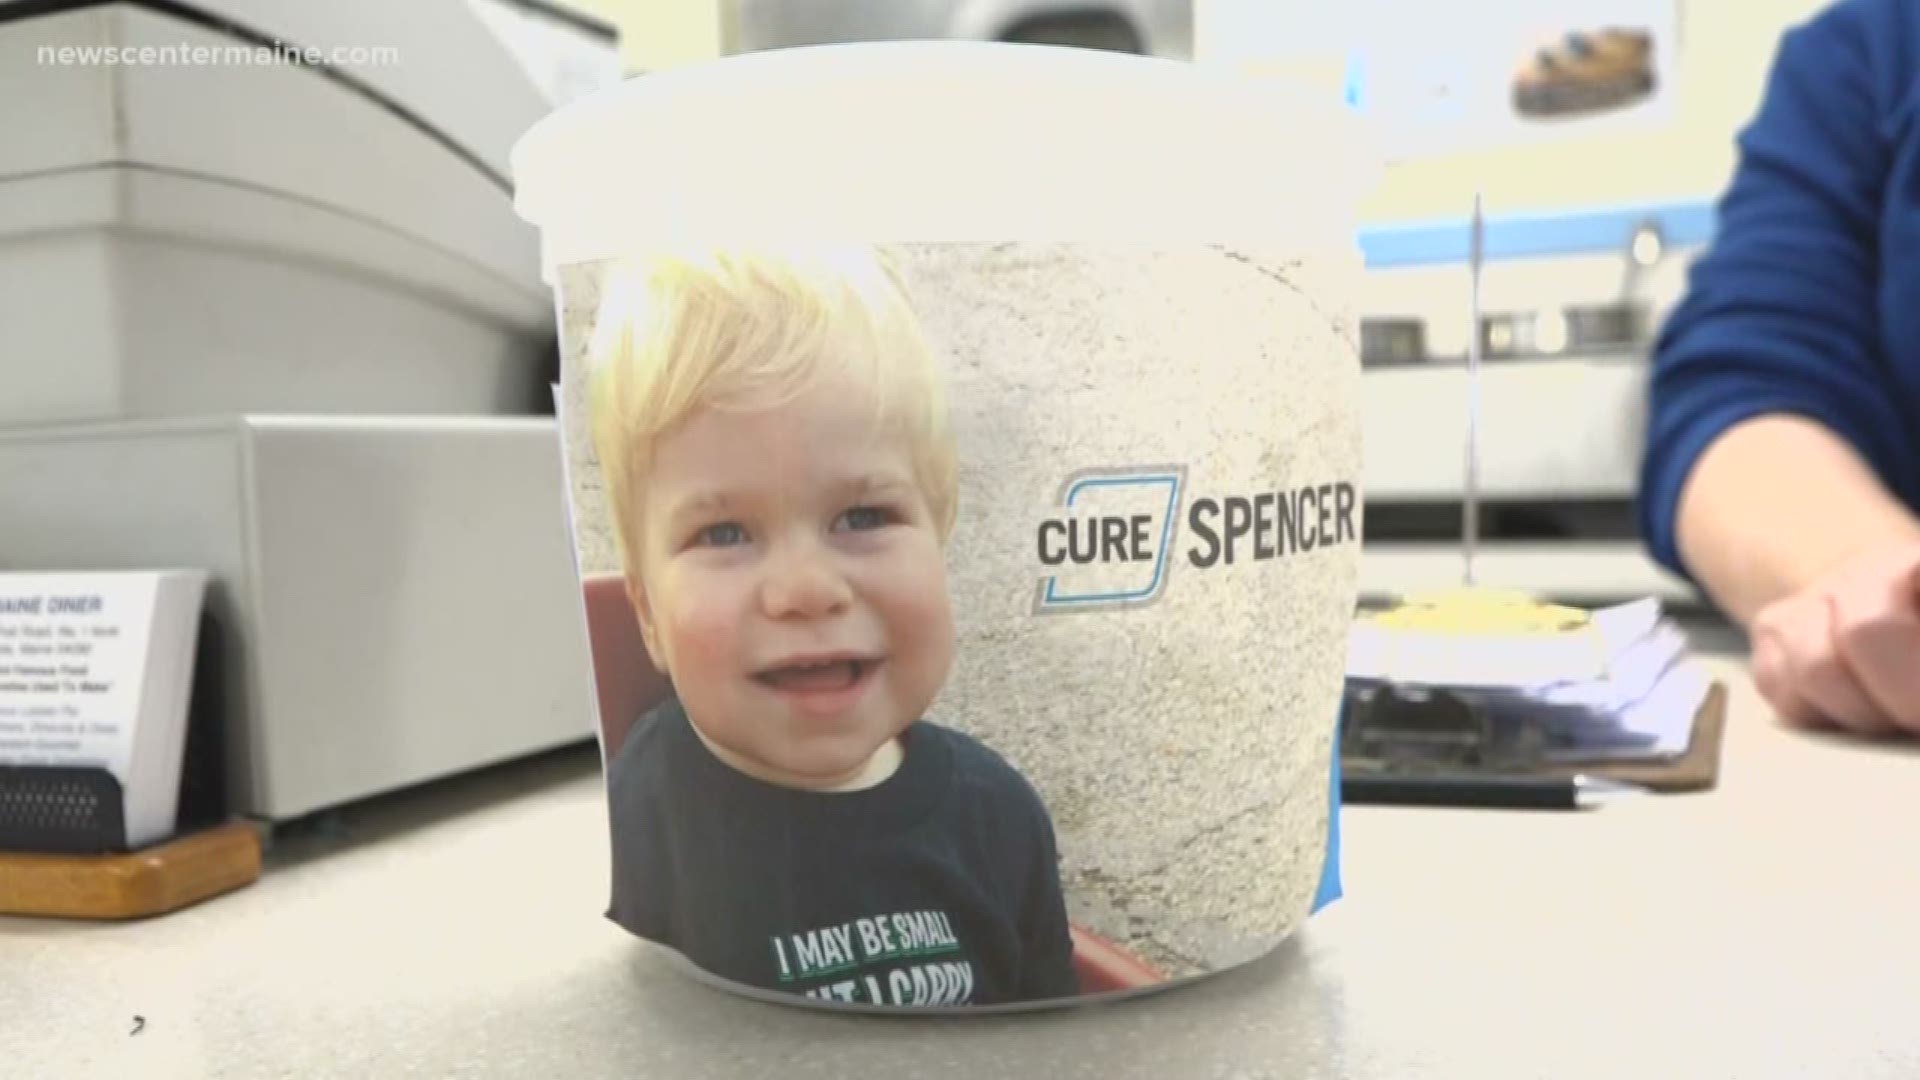 The Wells High School wrestling team hosted a pancake fundraiser to fight childhood Alzheimer's and help 3-year-old Spencer Smith.